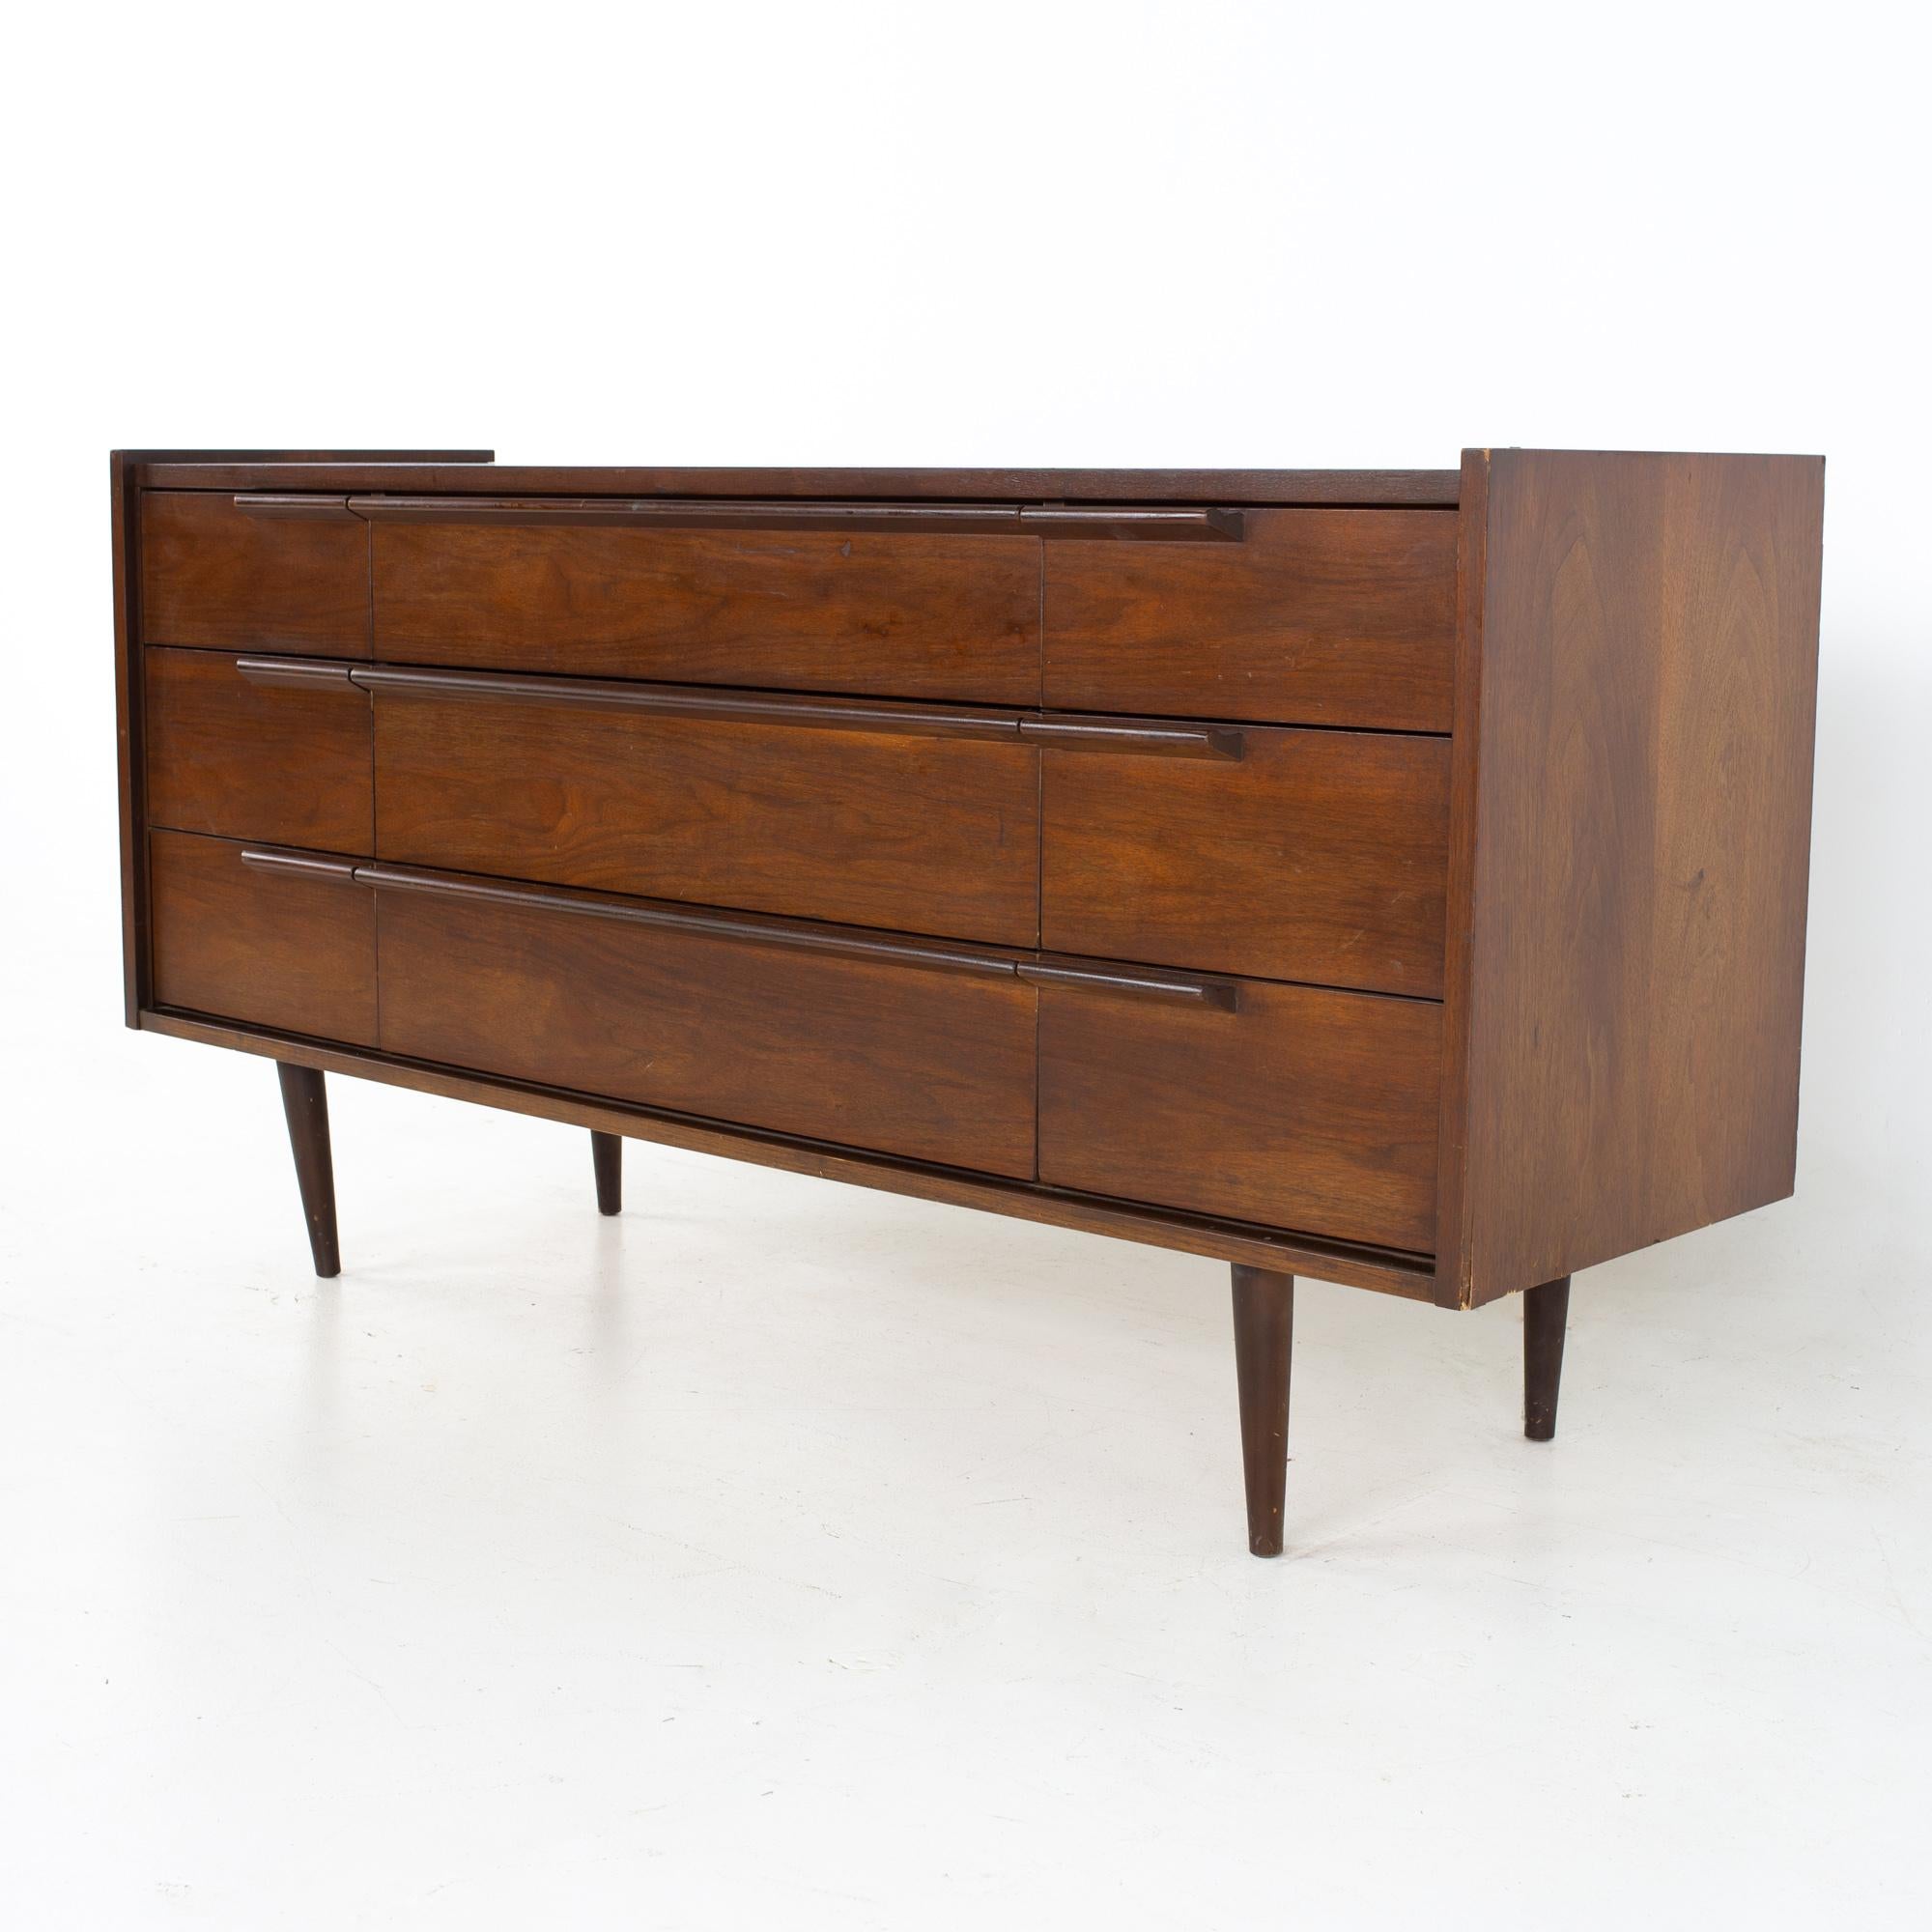 United style mid century walnut 9 drawer lowboy dresser
Dresser measures: 60 wide x 18.5 deep x 31 inches high

All pieces of furniture can be had in what we call restored vintage condition. That means the piece is restored upon purchase so it’s